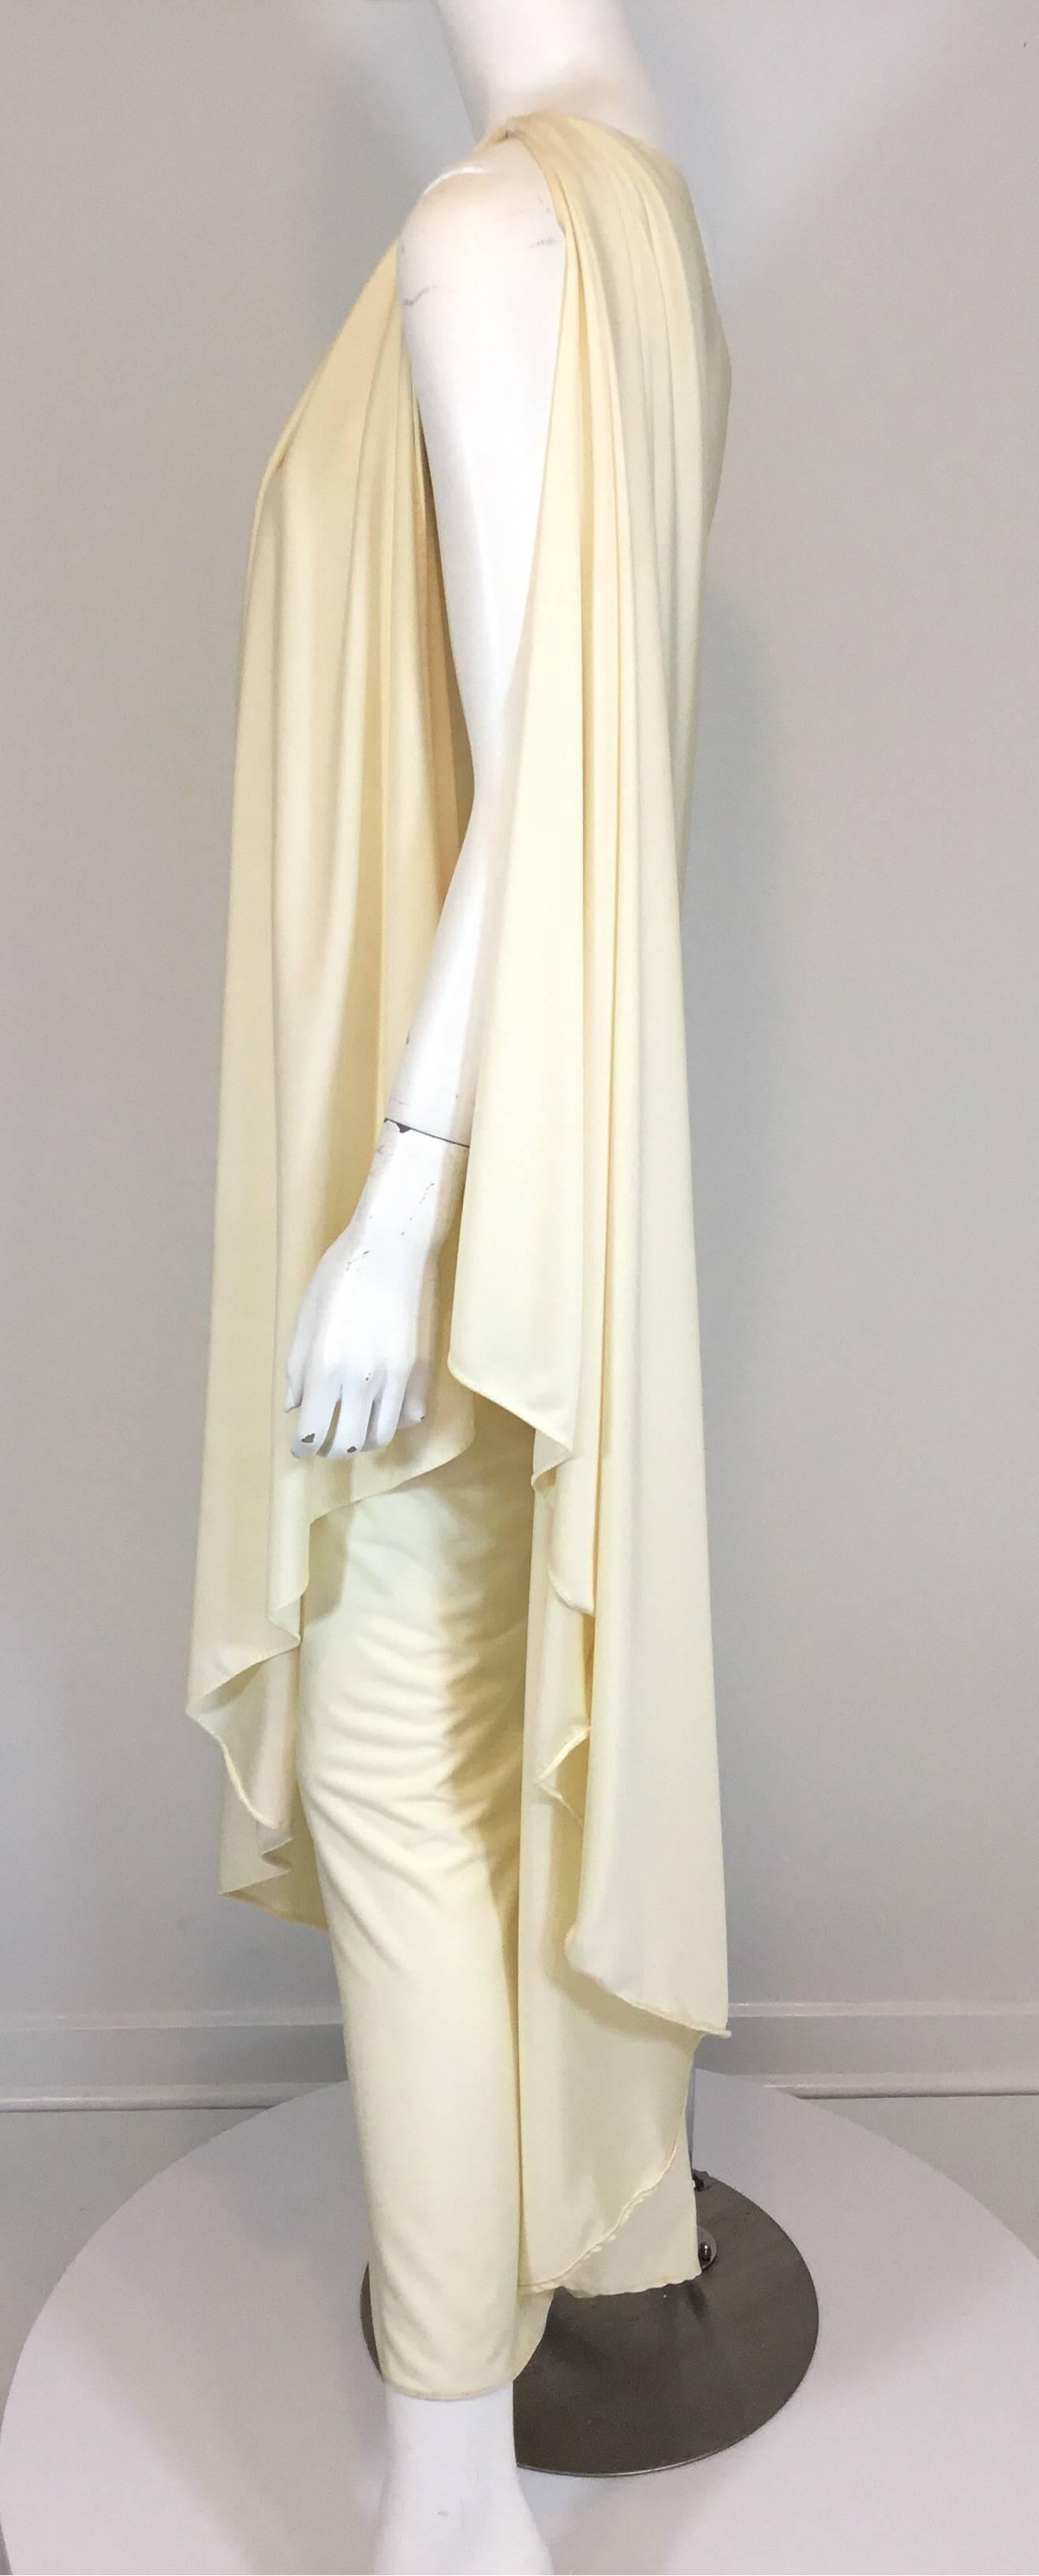 Halston IV one shoulder gown in an ivory/off-white synthetic jersey fabric. Has a hook-and-eye closure at the shoulder. Celebrity favorite and looks very good on.

Measurements: bust 33'', waist 36'', hips 38'', length 52''